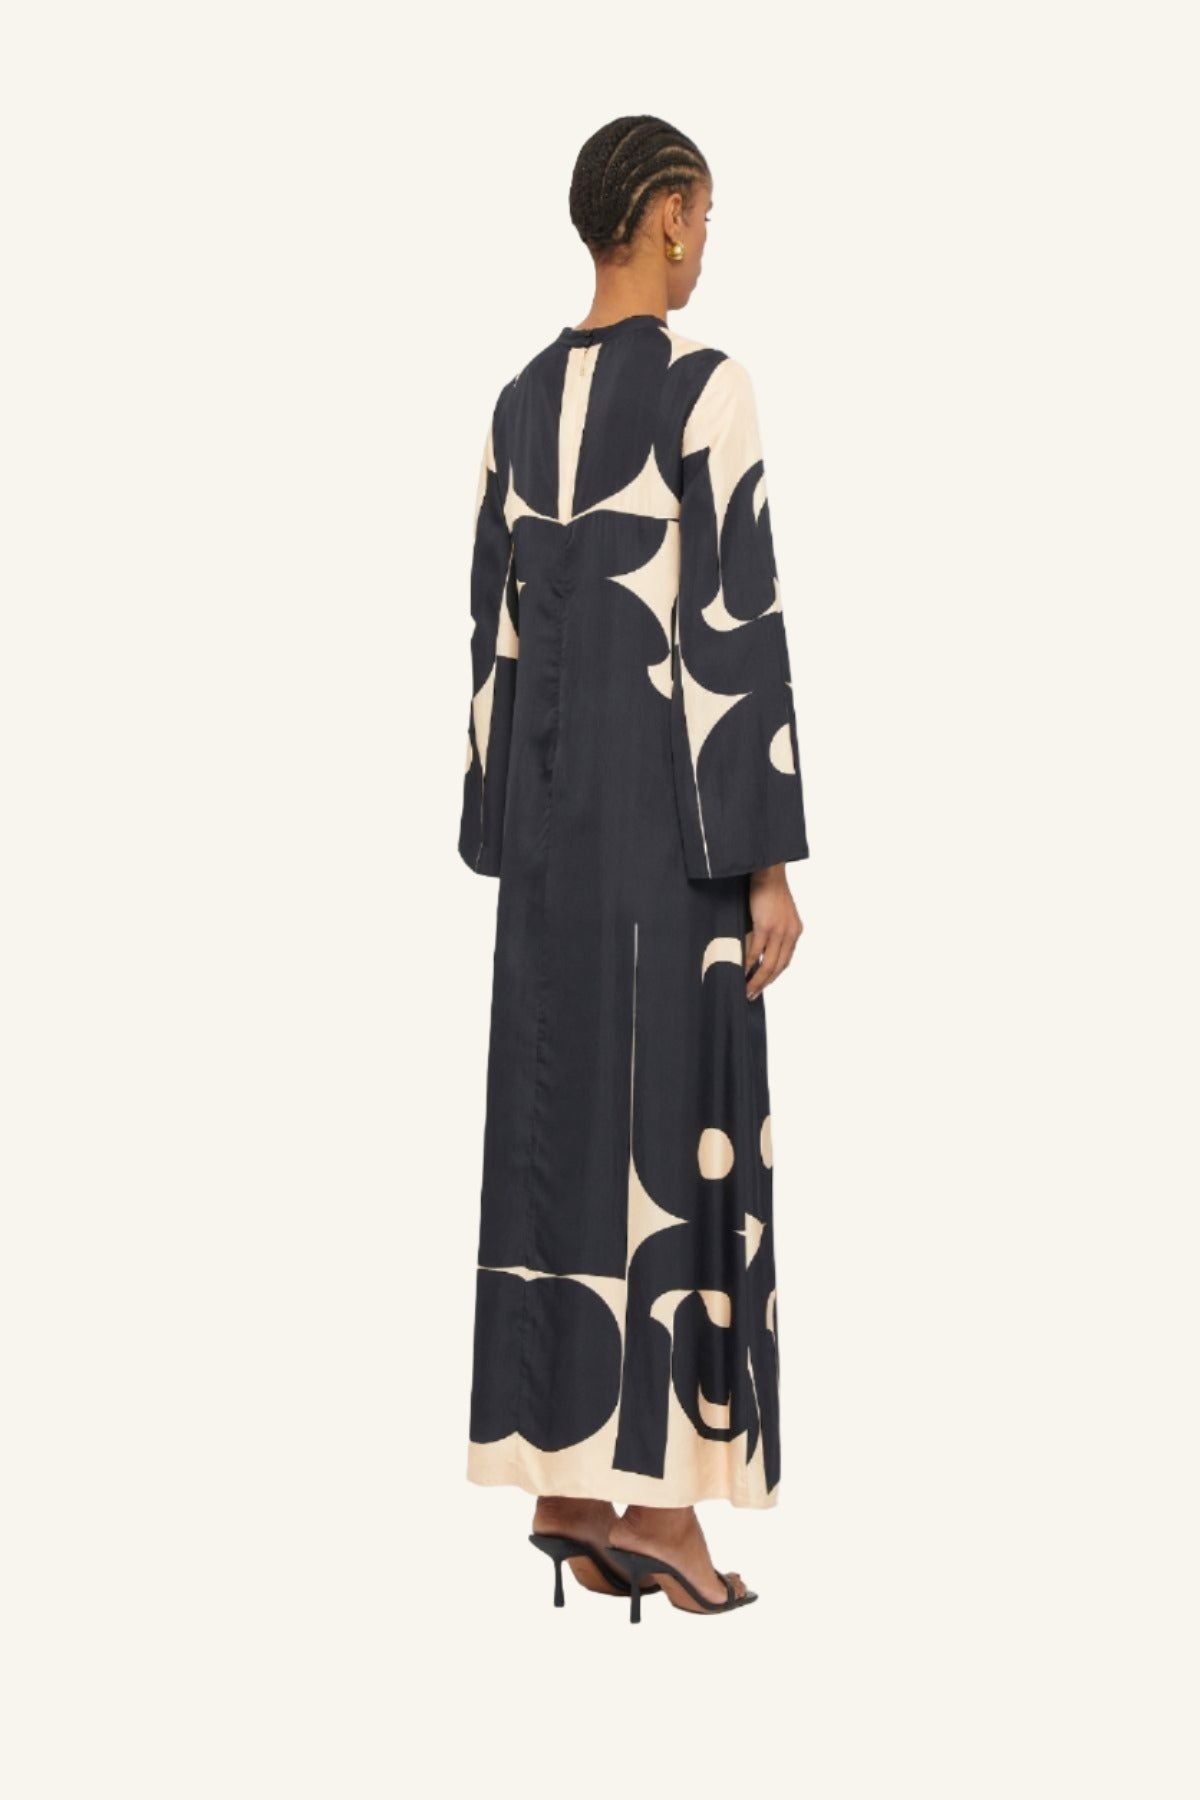 Black & Cream deco printed long silk gown crafted by Australian fashion designer GINGER & SMART